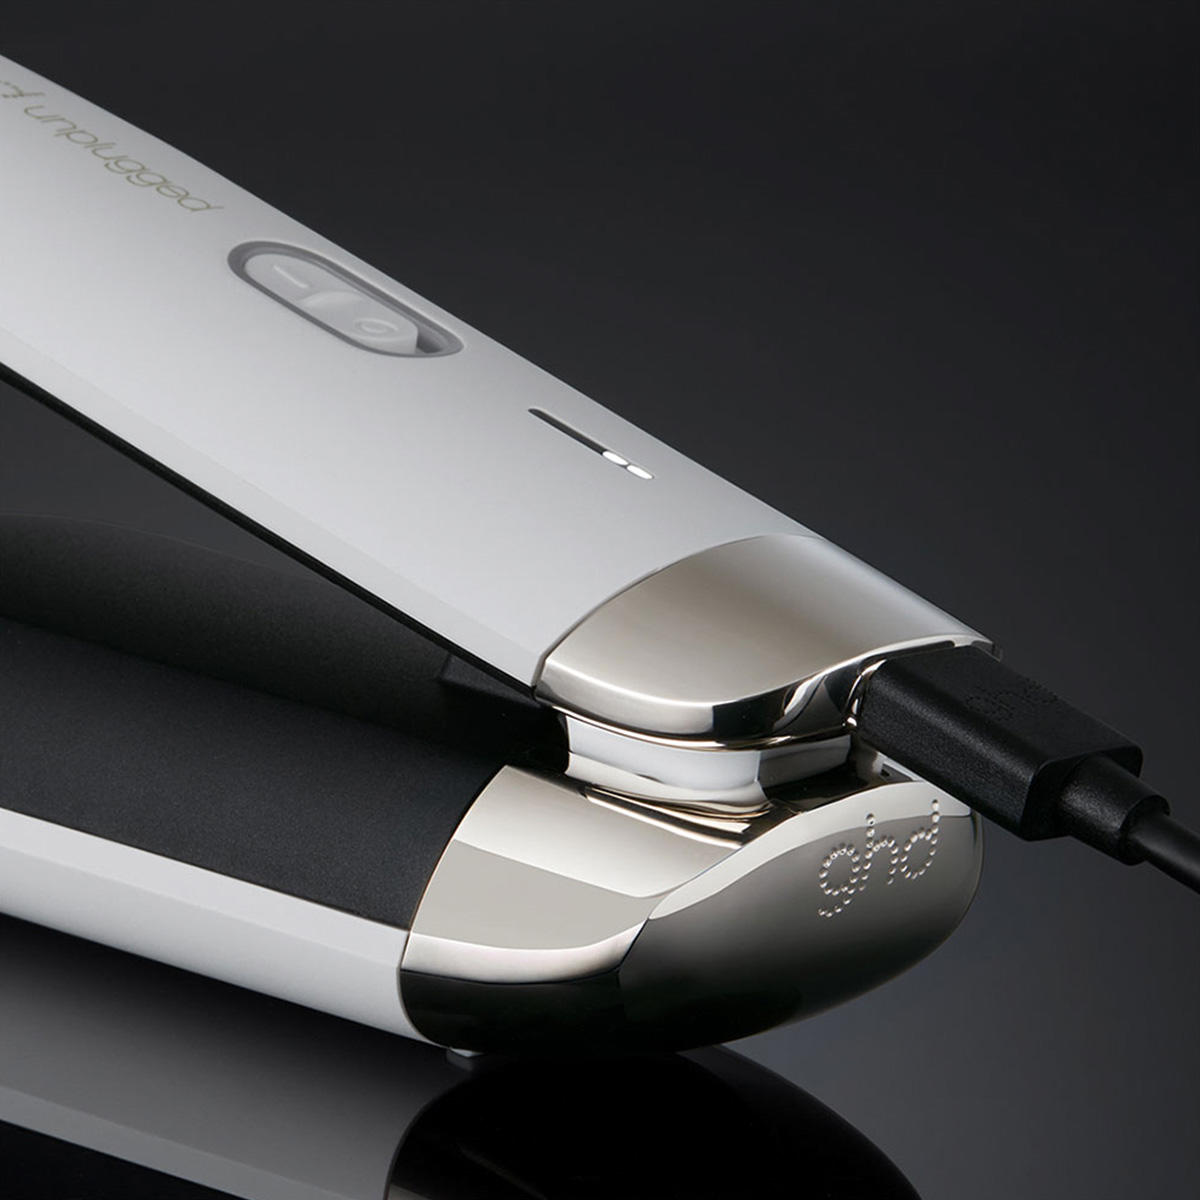 ghd unplugged Styler Wit - 3